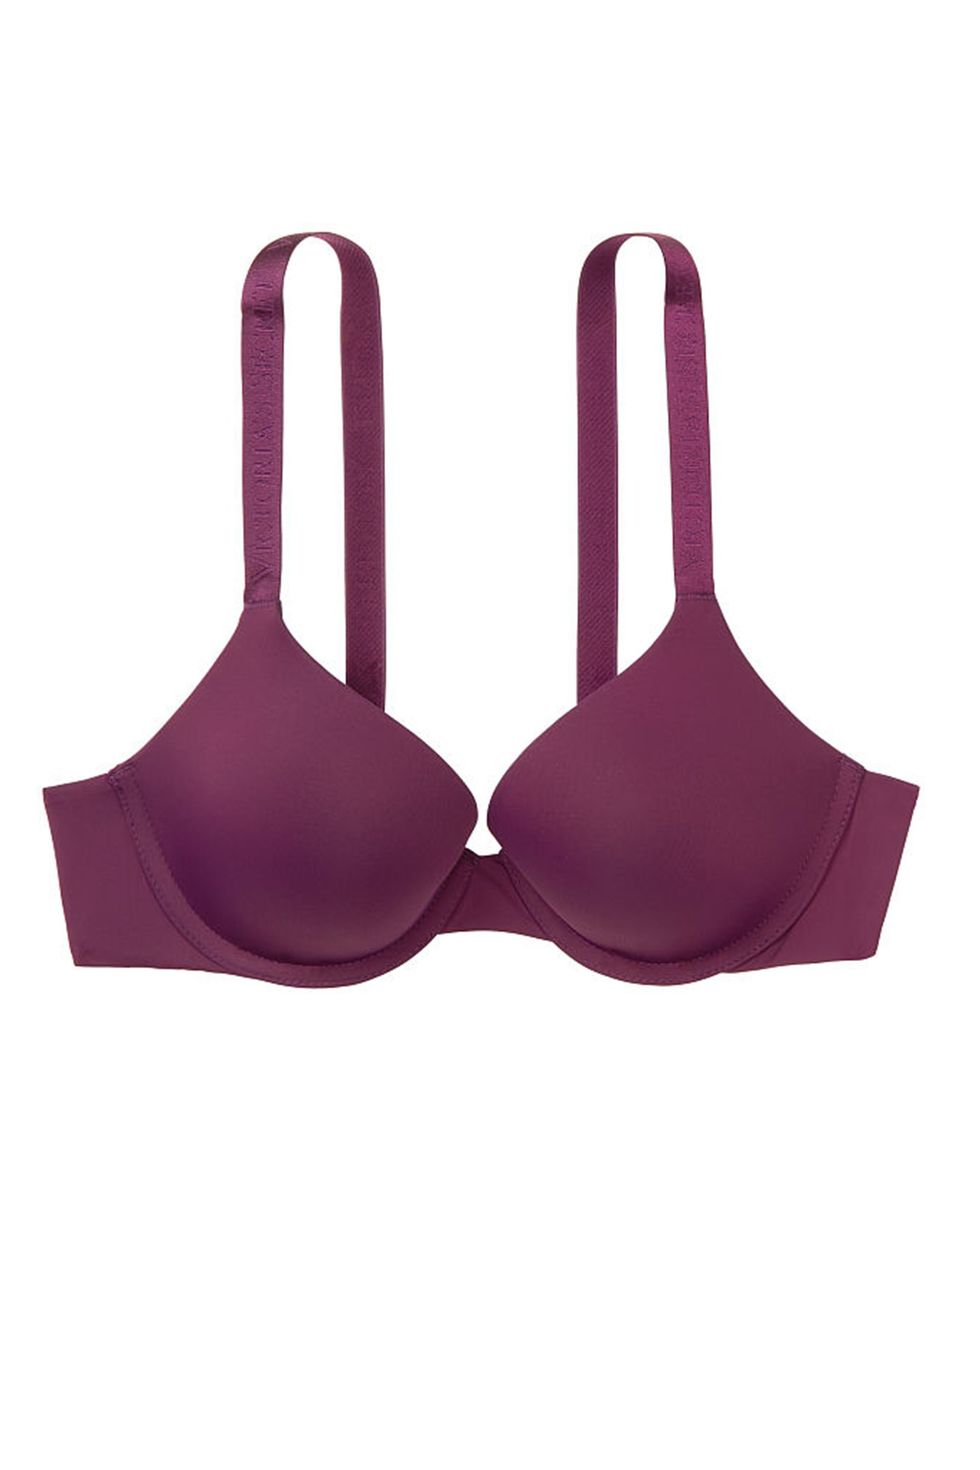 Best Push-Up Bras - The 9 Best Push-Up Bras That Will Make You Feel ...